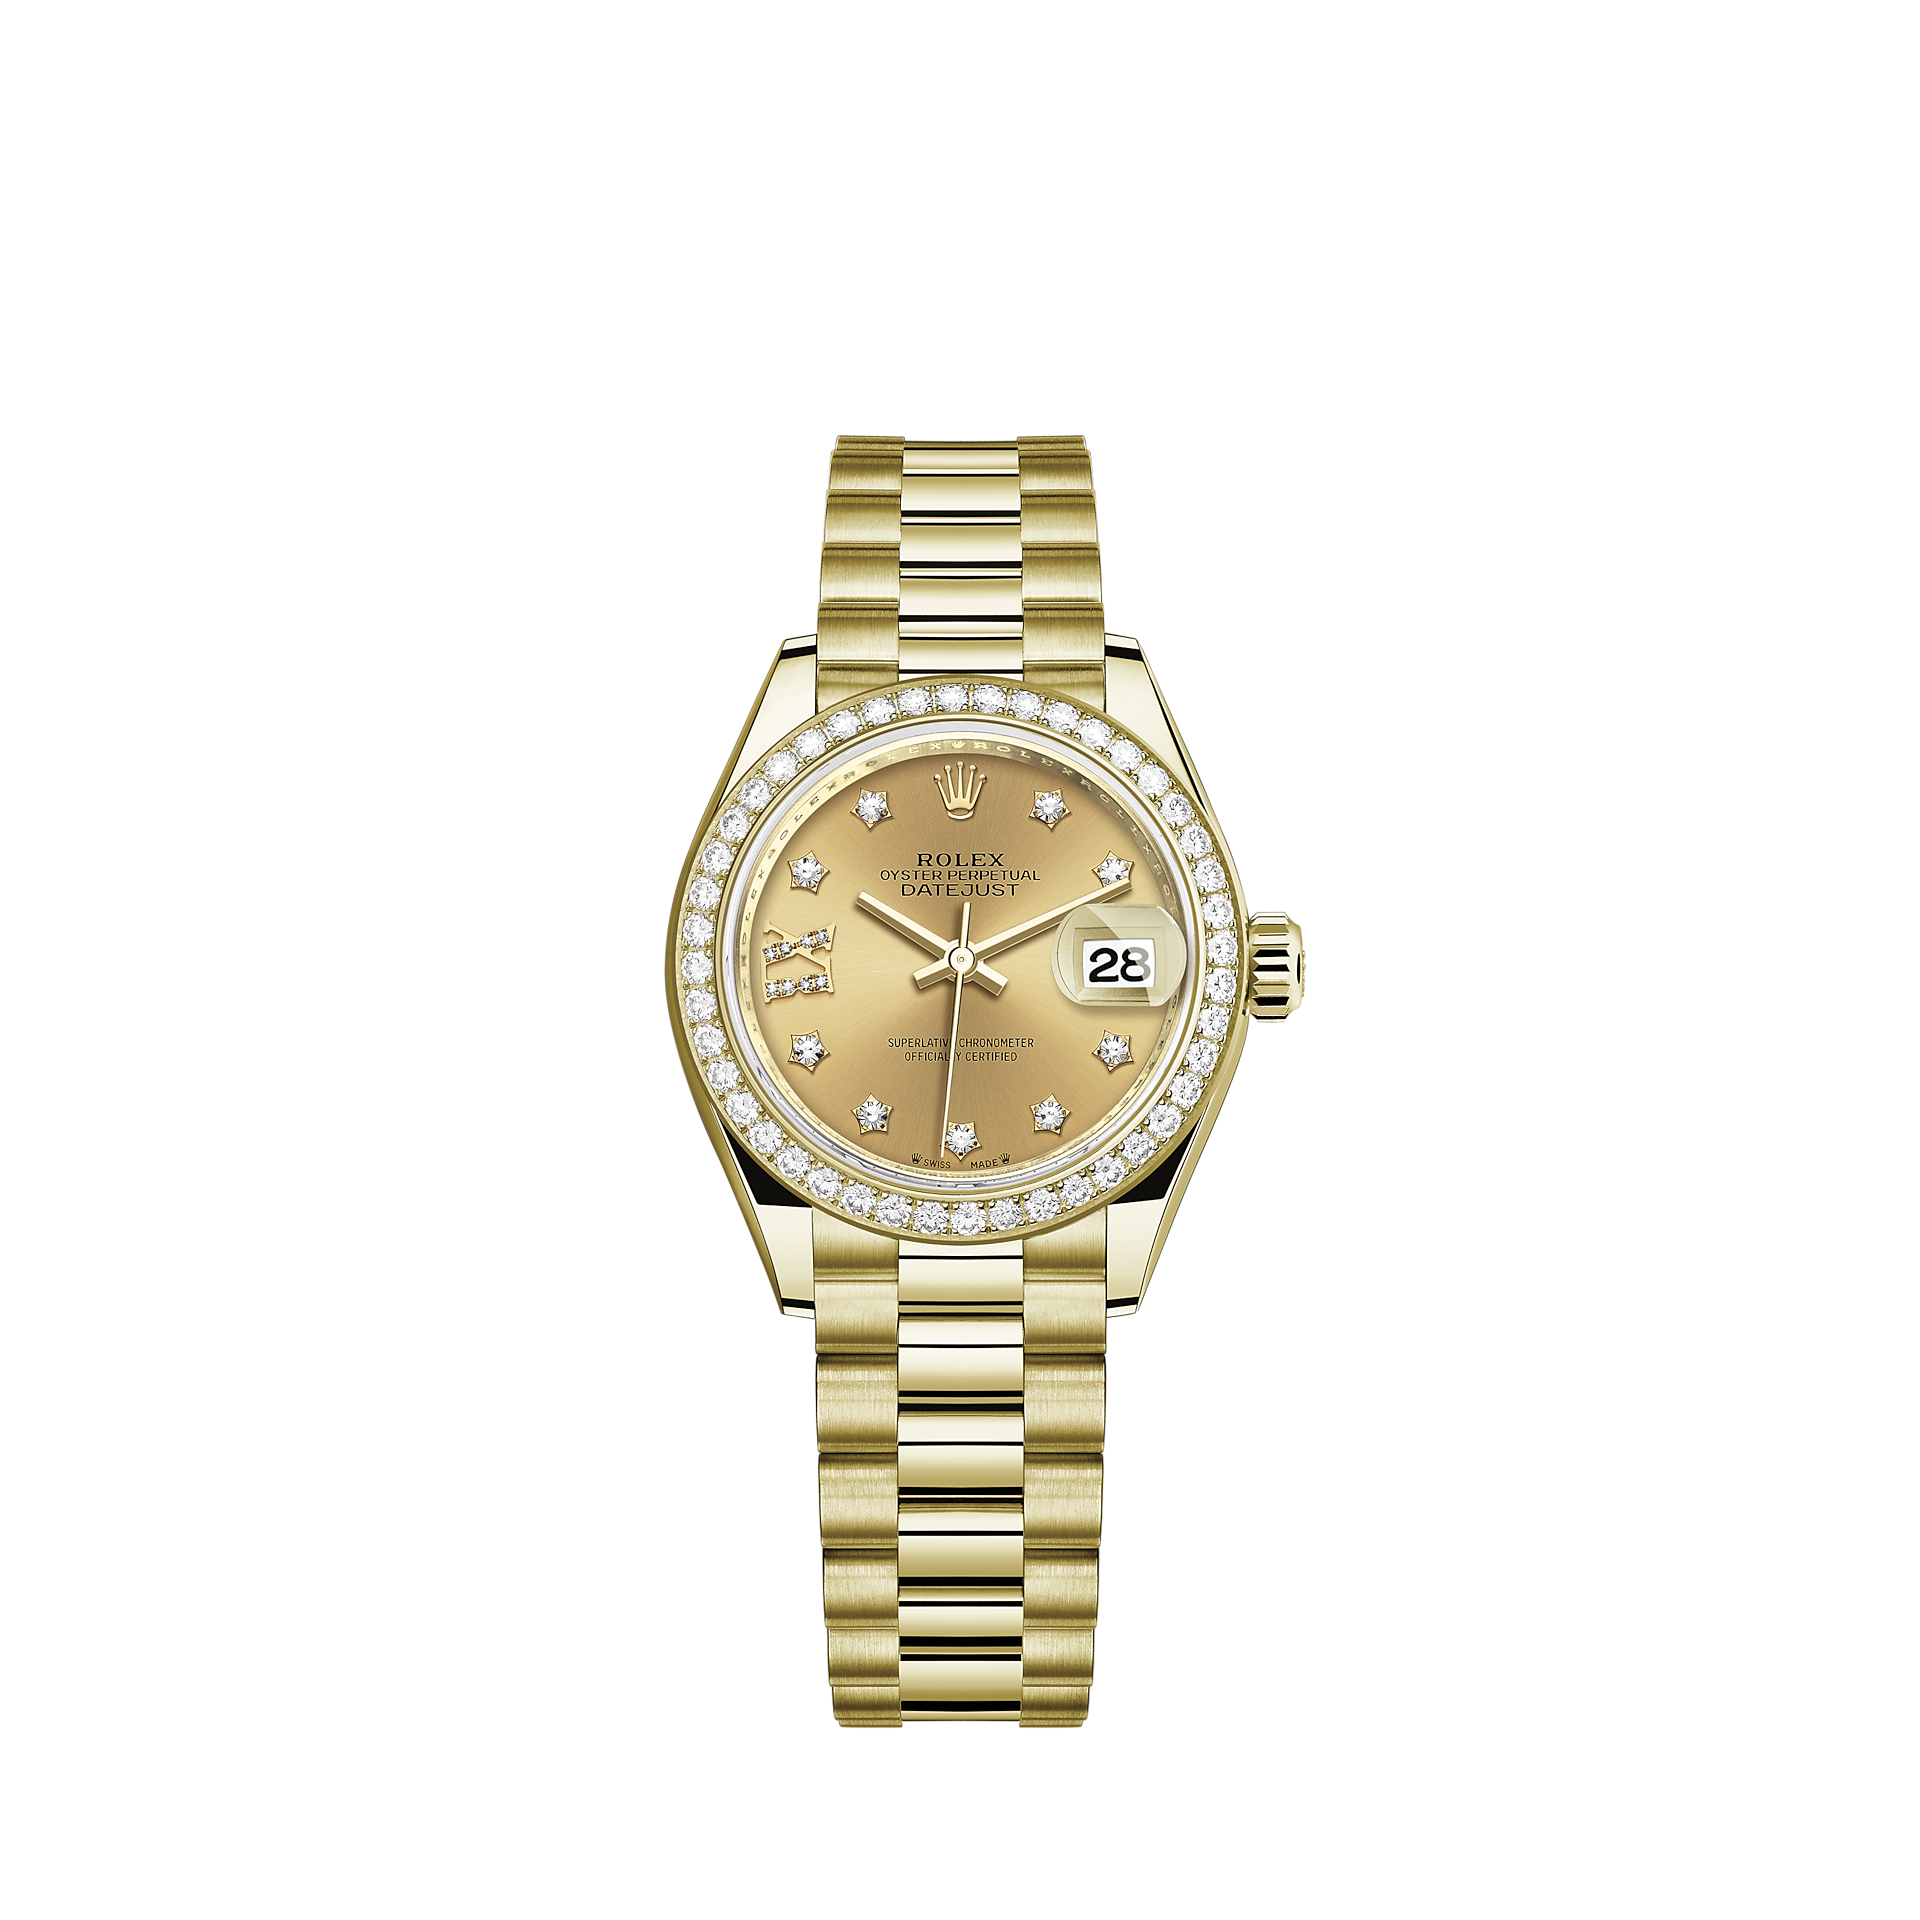 Rolex Lady-DateJust 18k Yellow Gold President Dial Automatic Women's ...